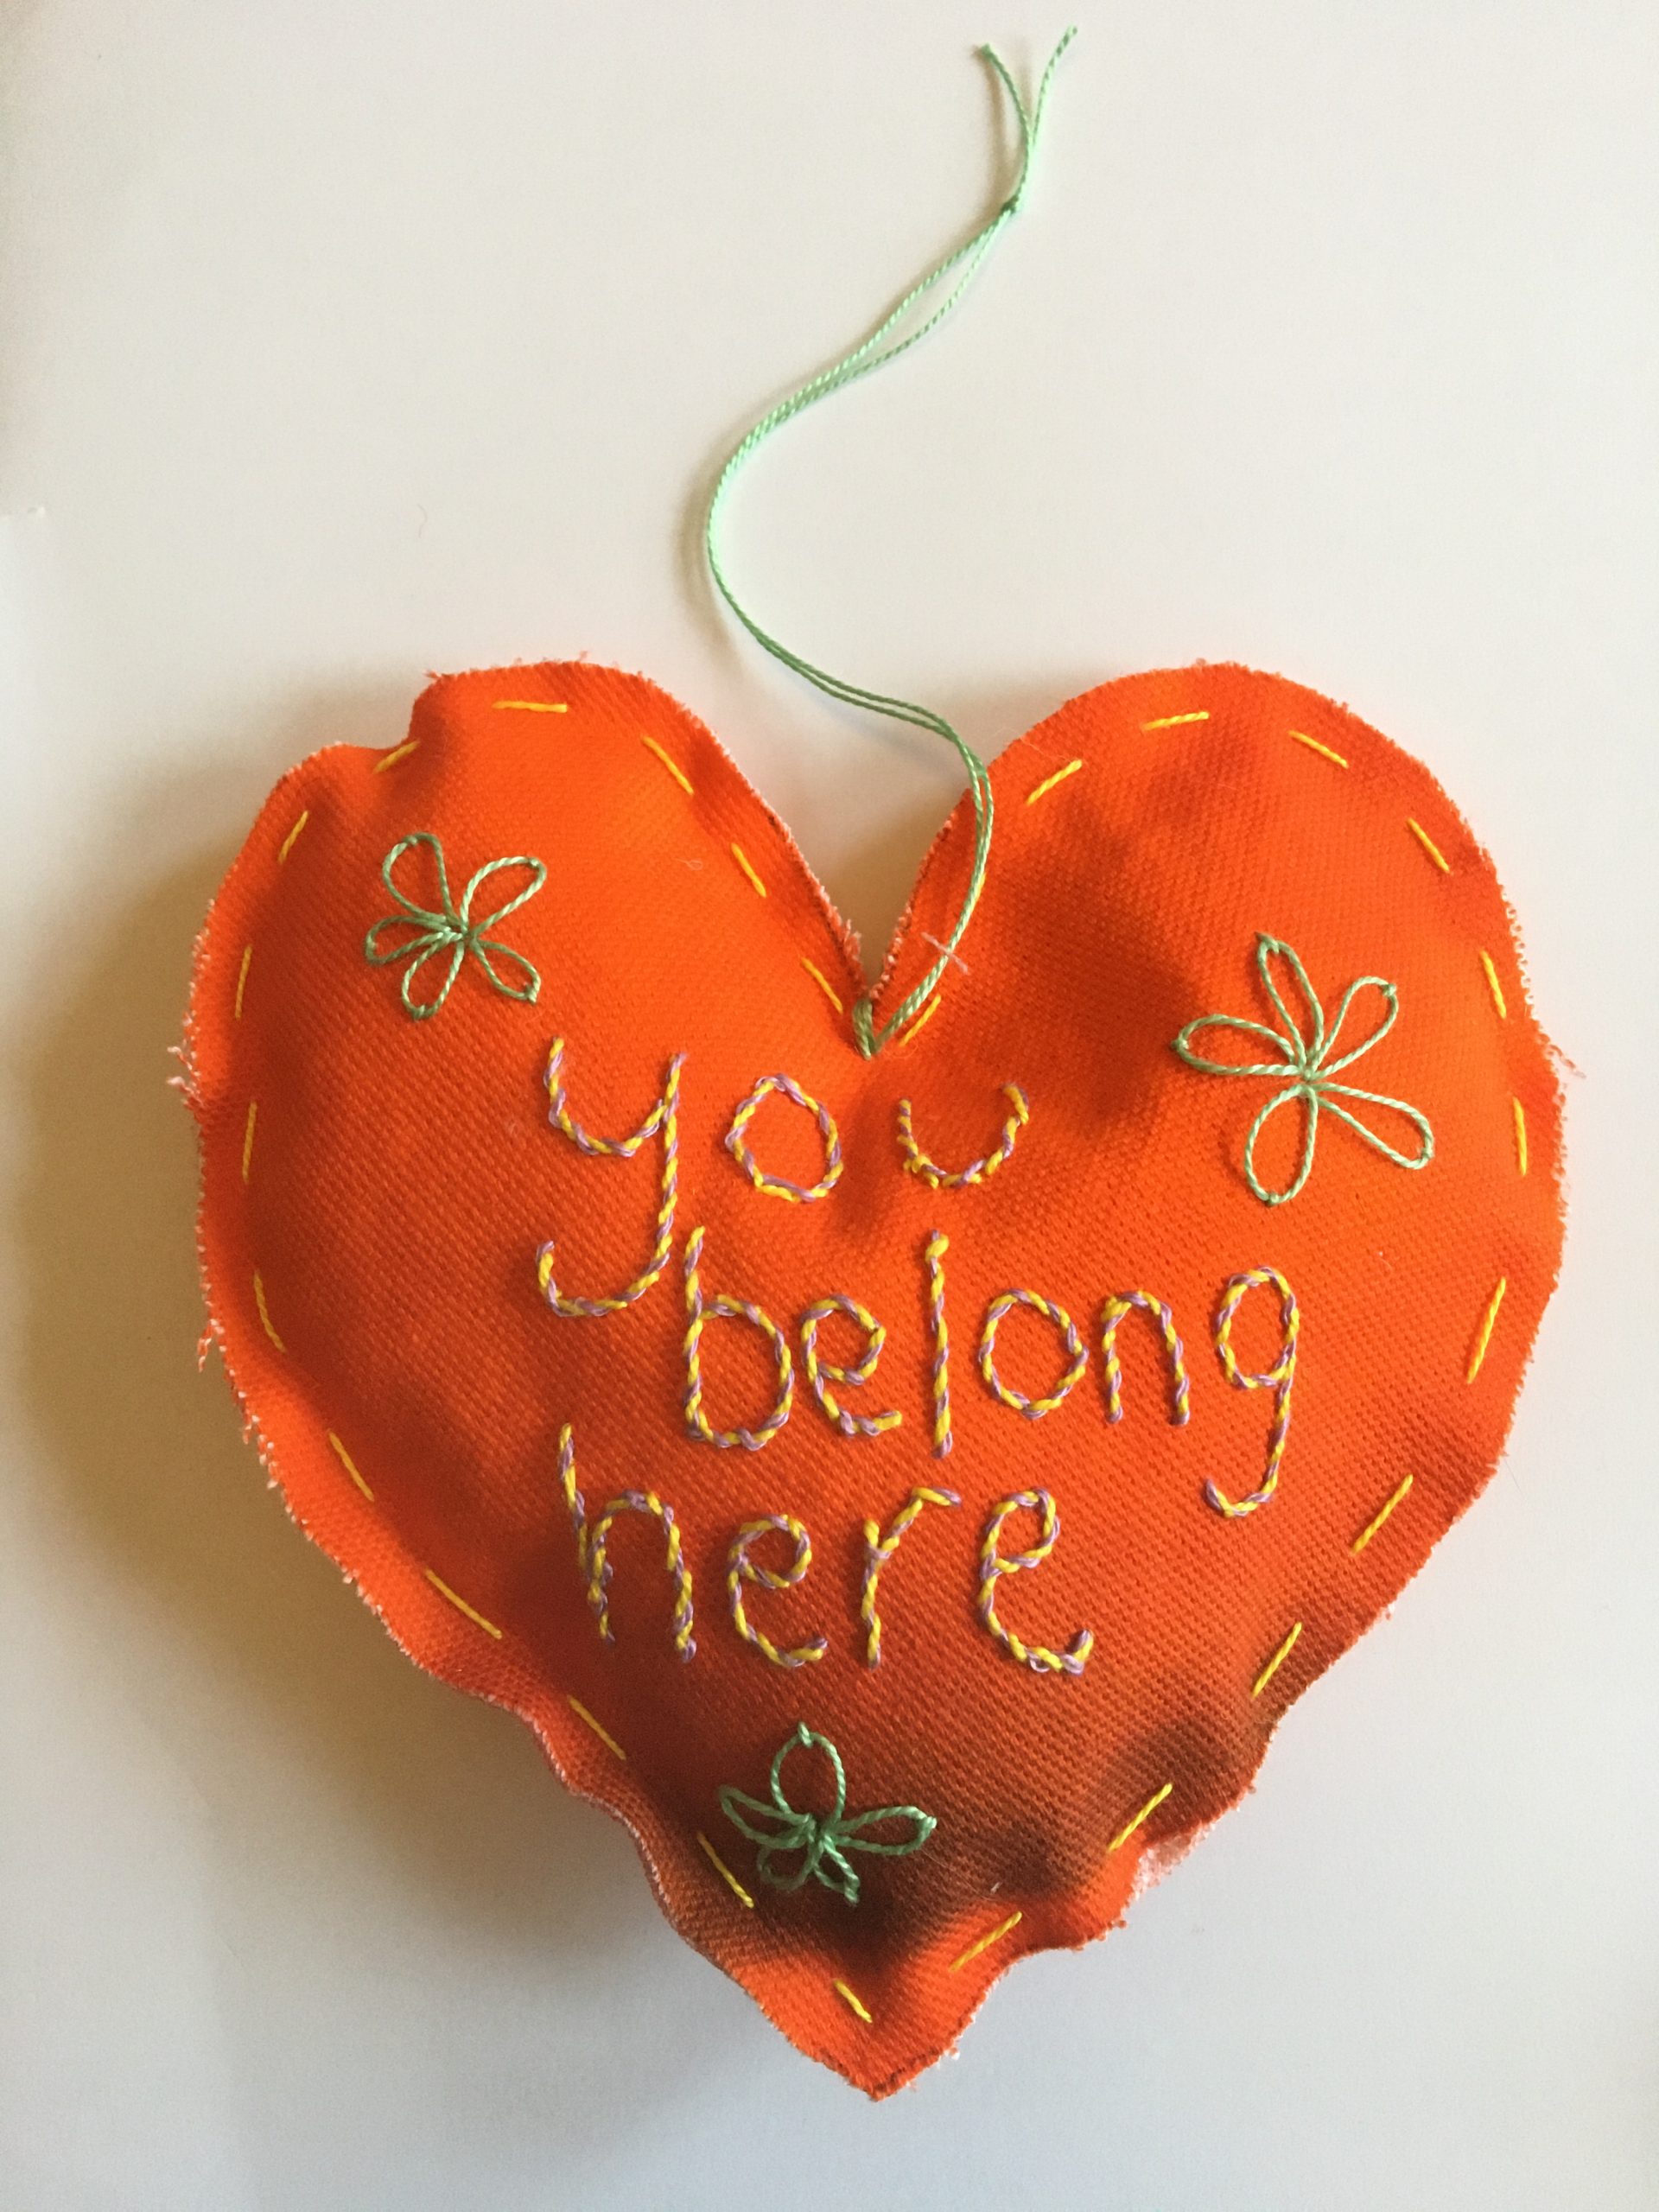 Heart shaped textile creation stitched with the words 'you belong here', made at The Fabric of Protest workshop at People's History Museum.